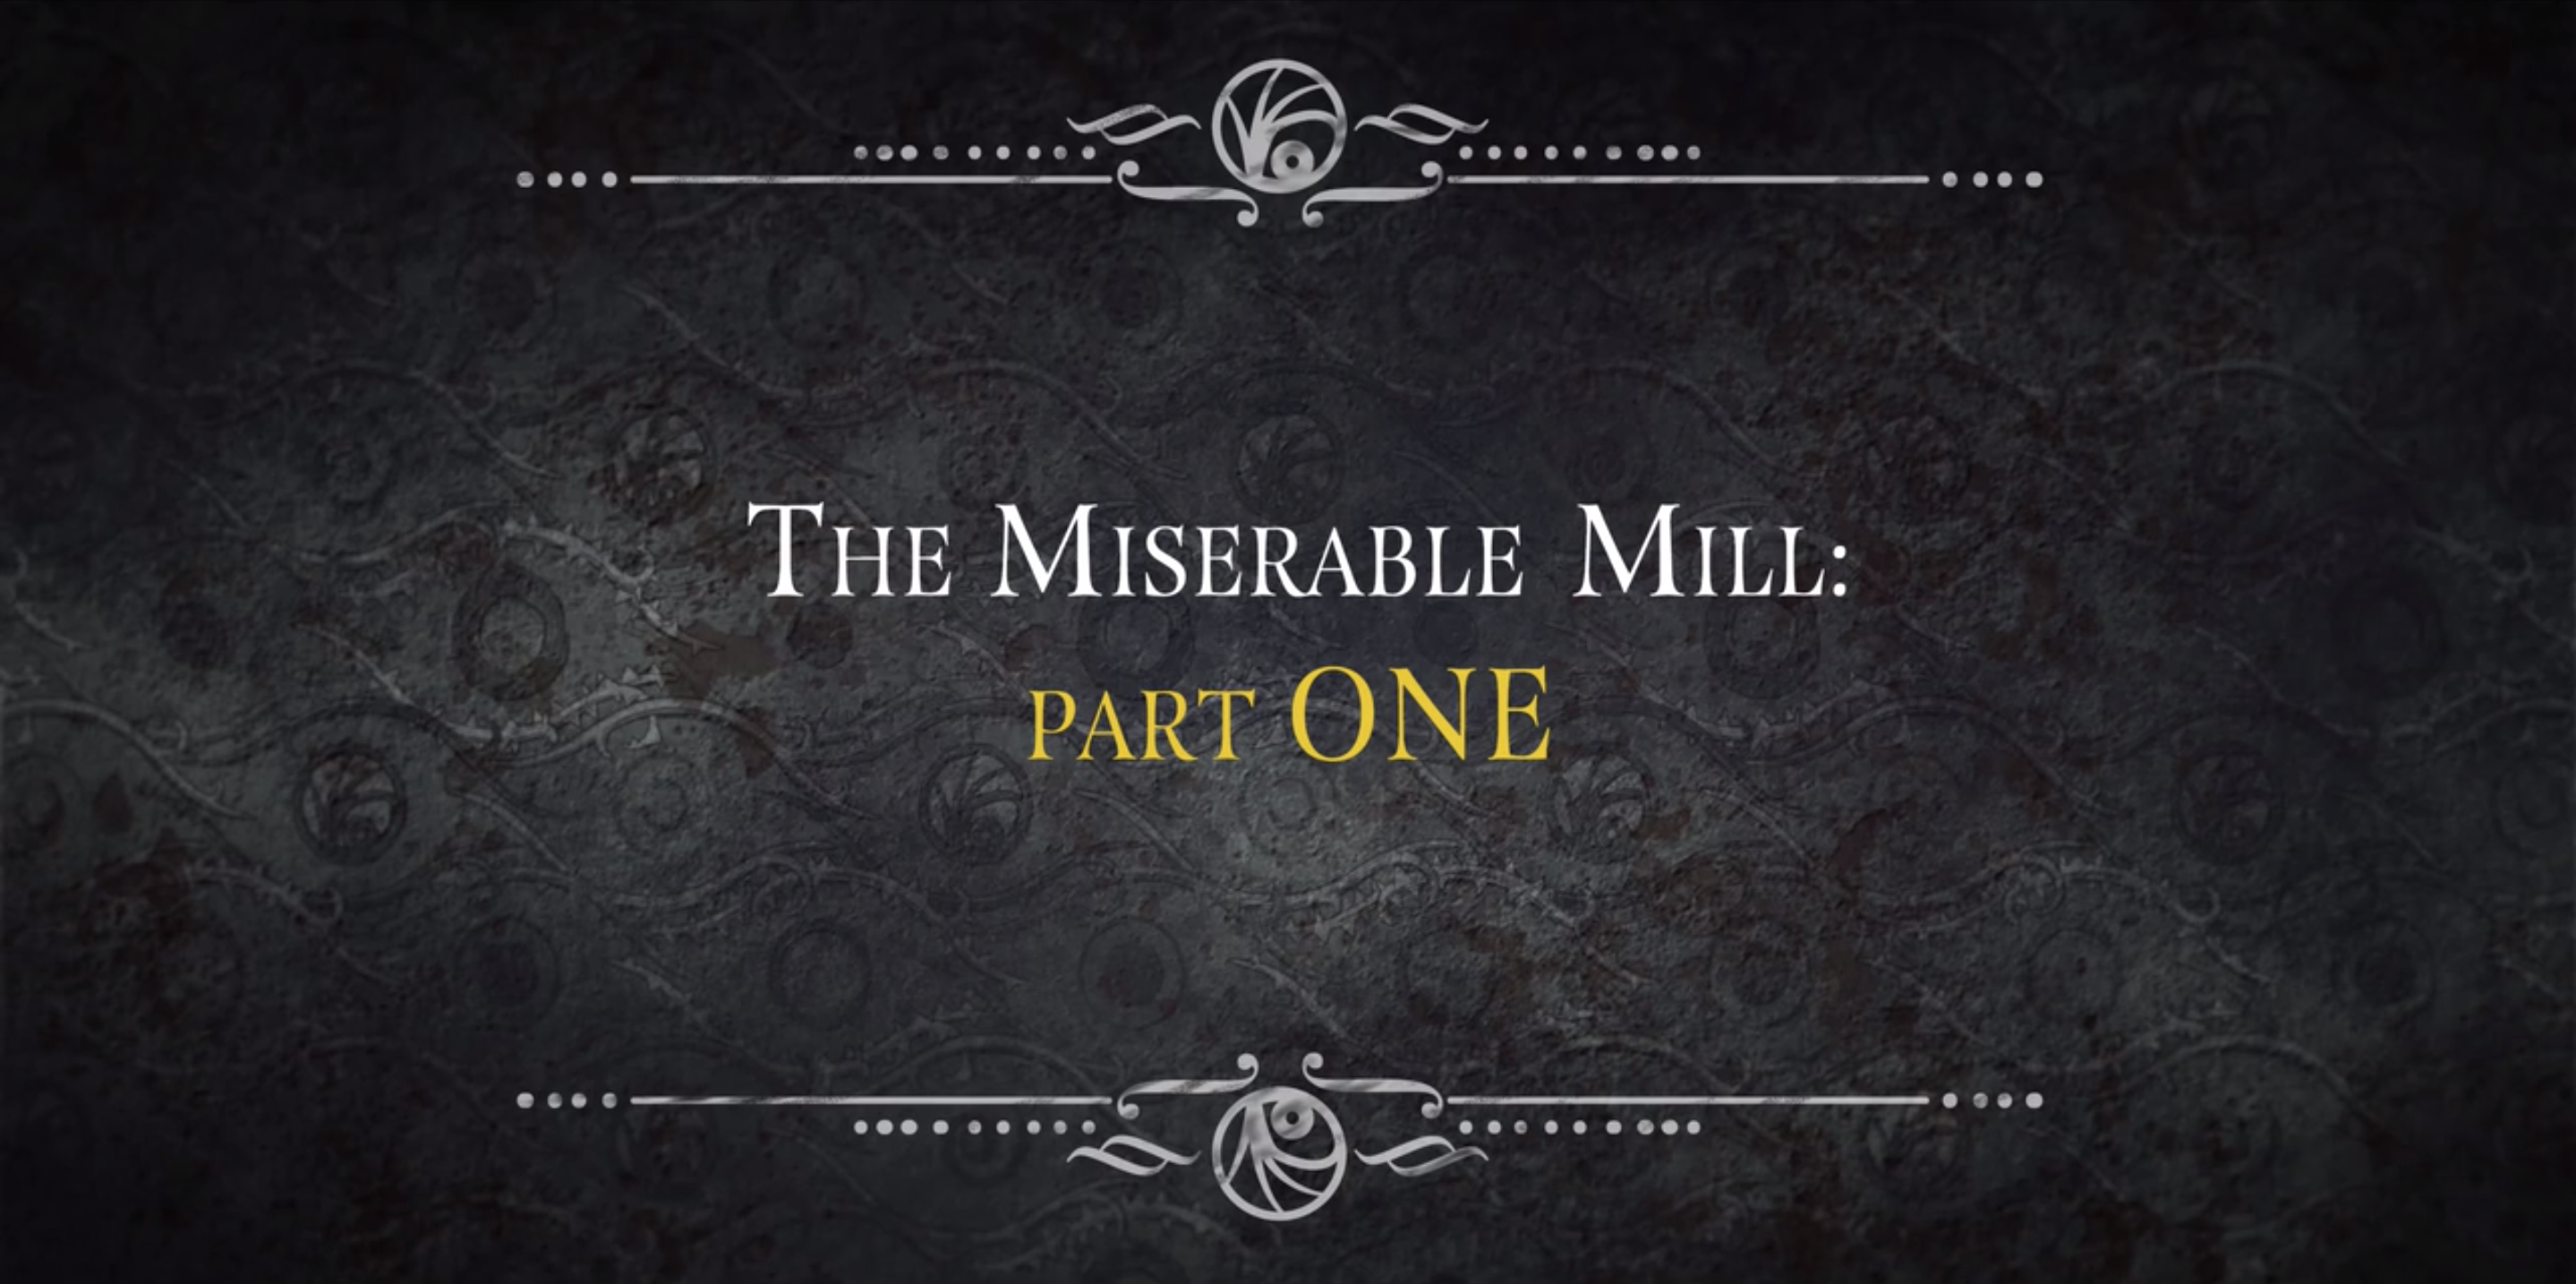 the miserable mill by lemony snicket